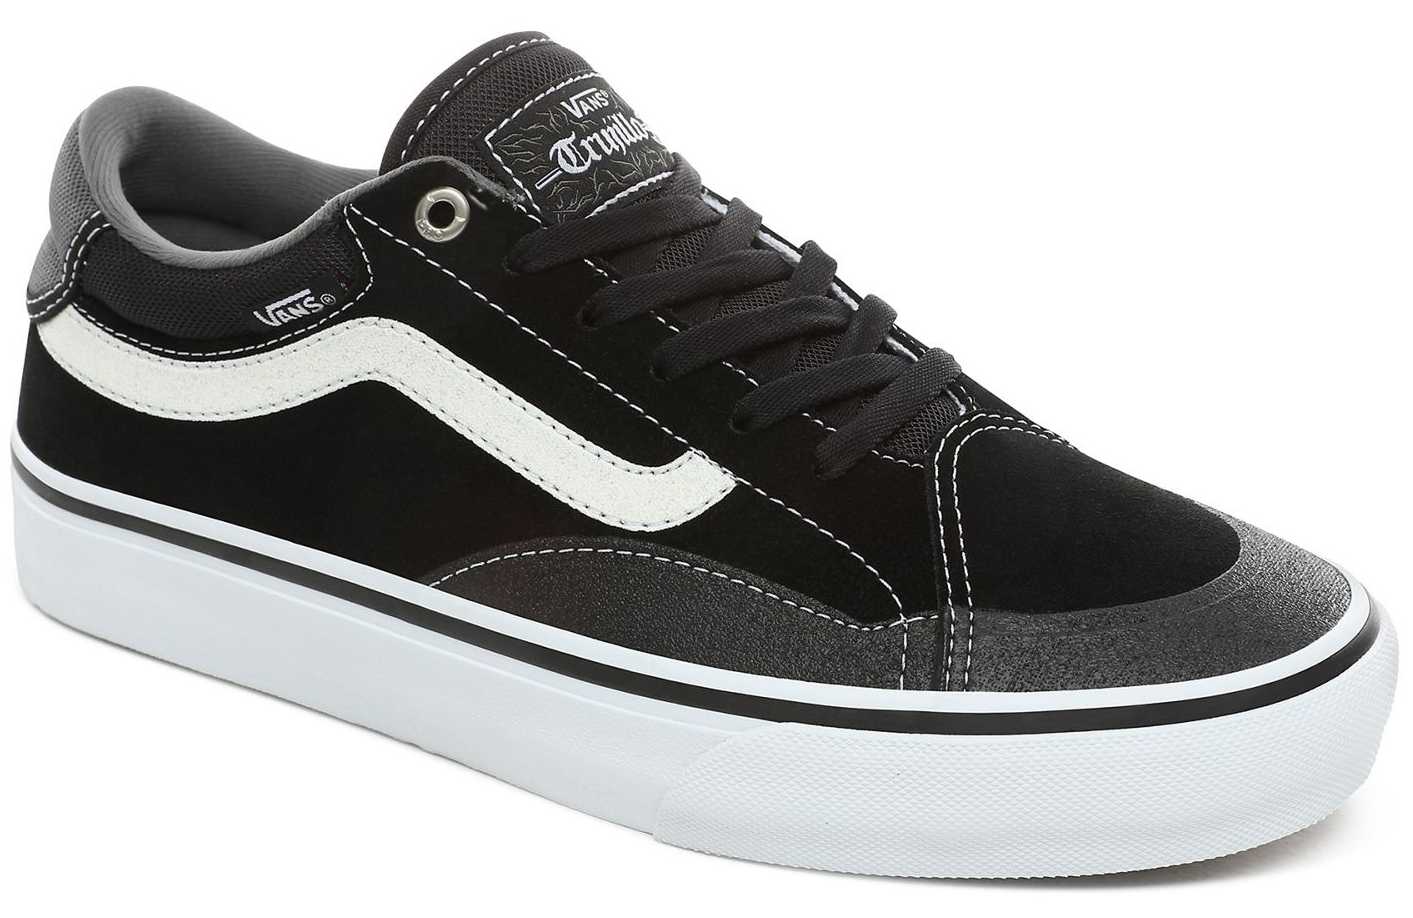 Vans TNT Advanced BLACK-WHITE VN0A3TJXY28 - HBC Surf OnLine Surf and Skate - and Save